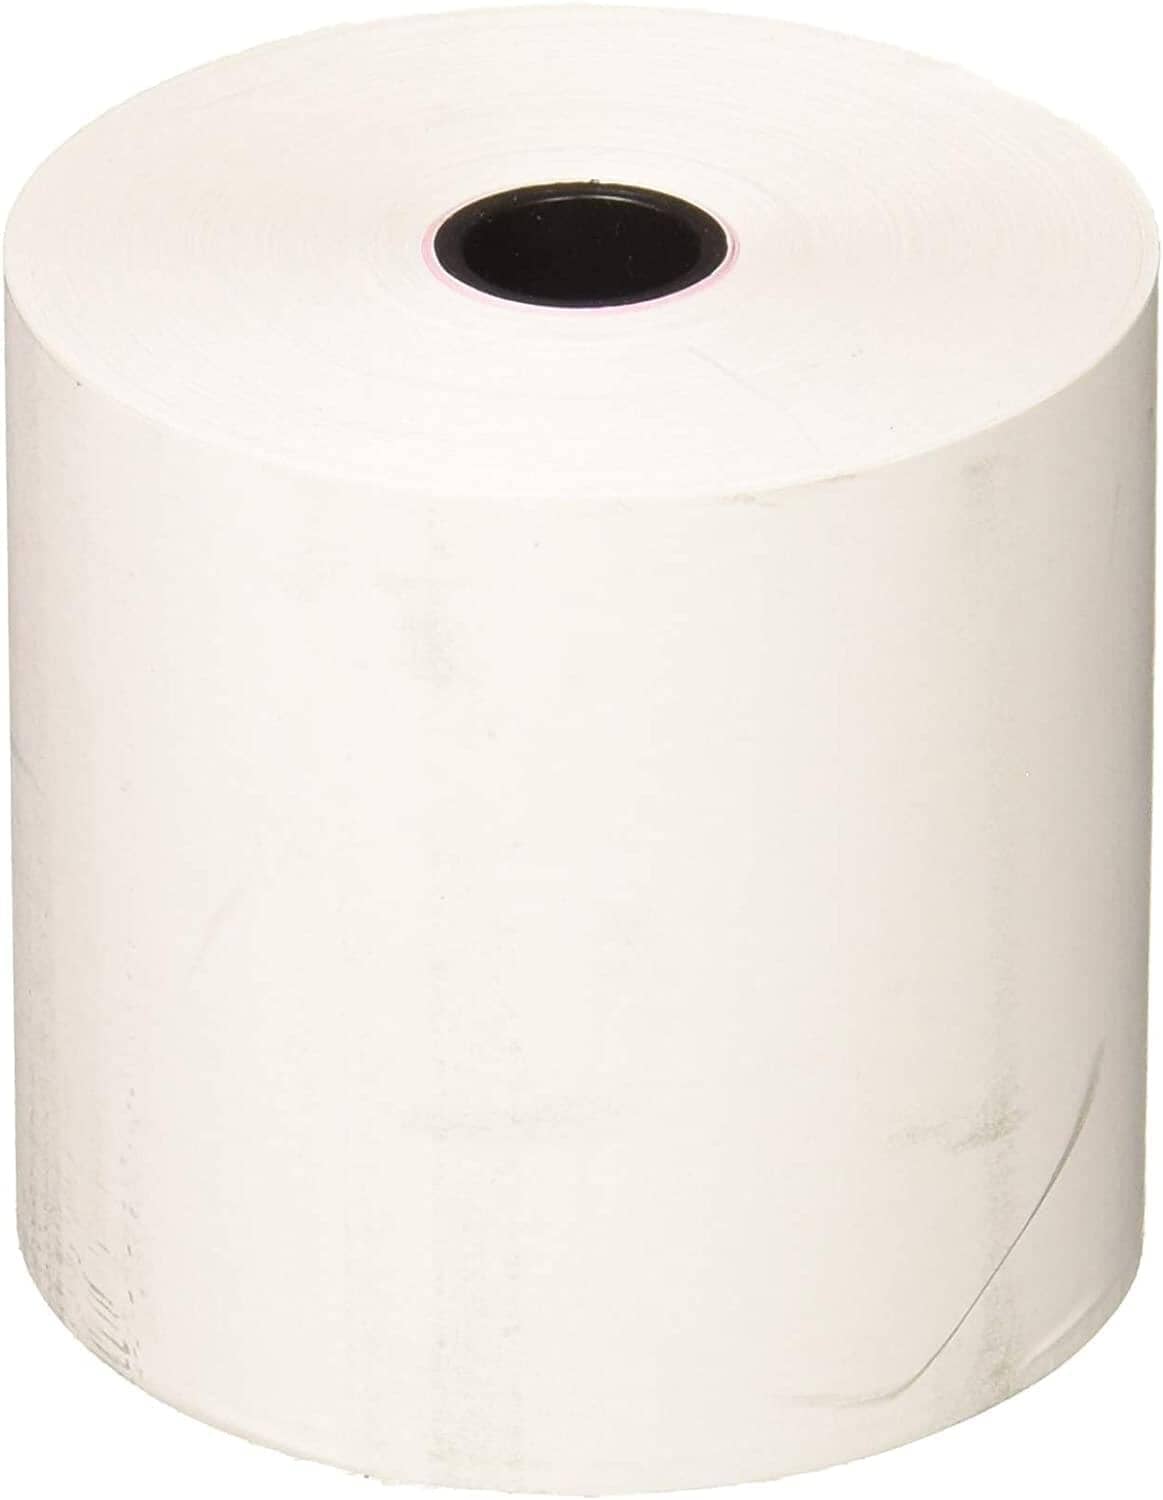 FHS Retail Thermal Receipt Paper, 2.25 Inches x 165 Feet Roll, 6 per Pack fhs-paperrolls